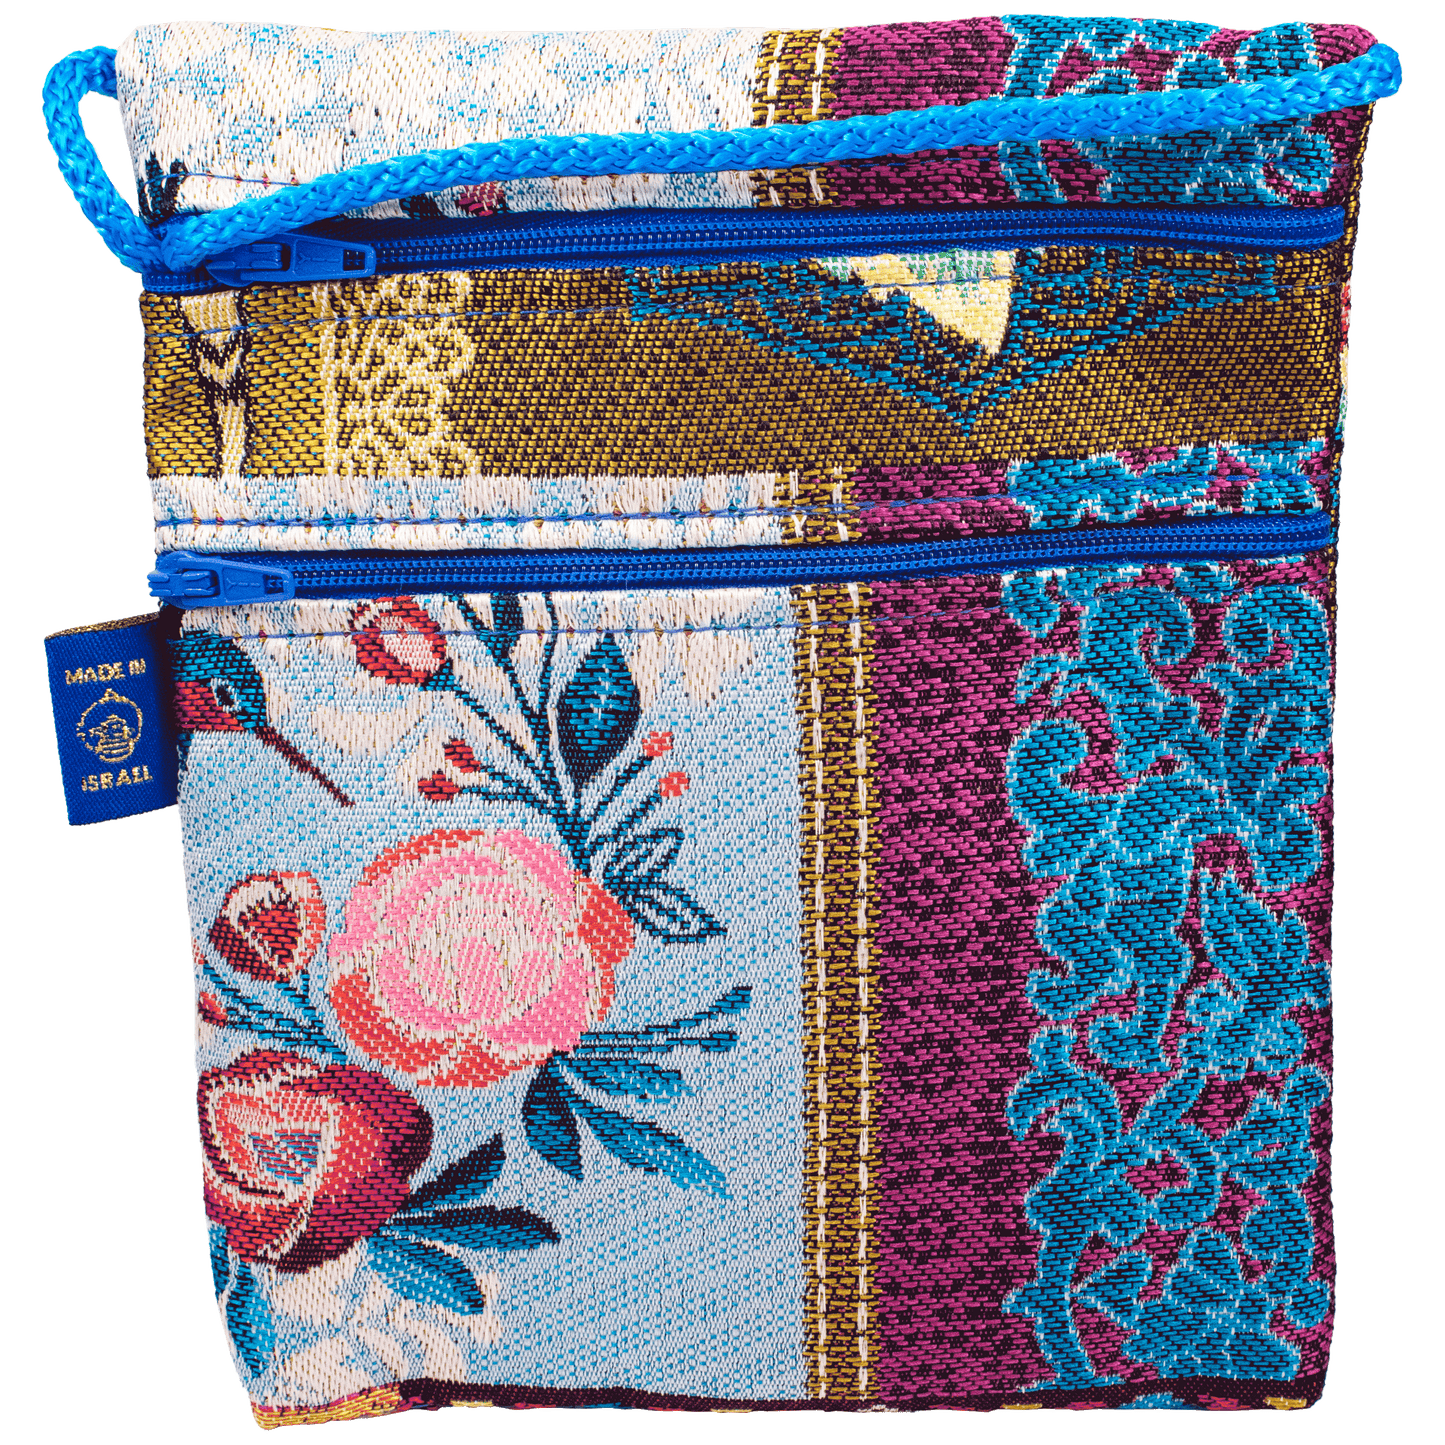 Crossbody Purse with various designs blue patchwork pattern